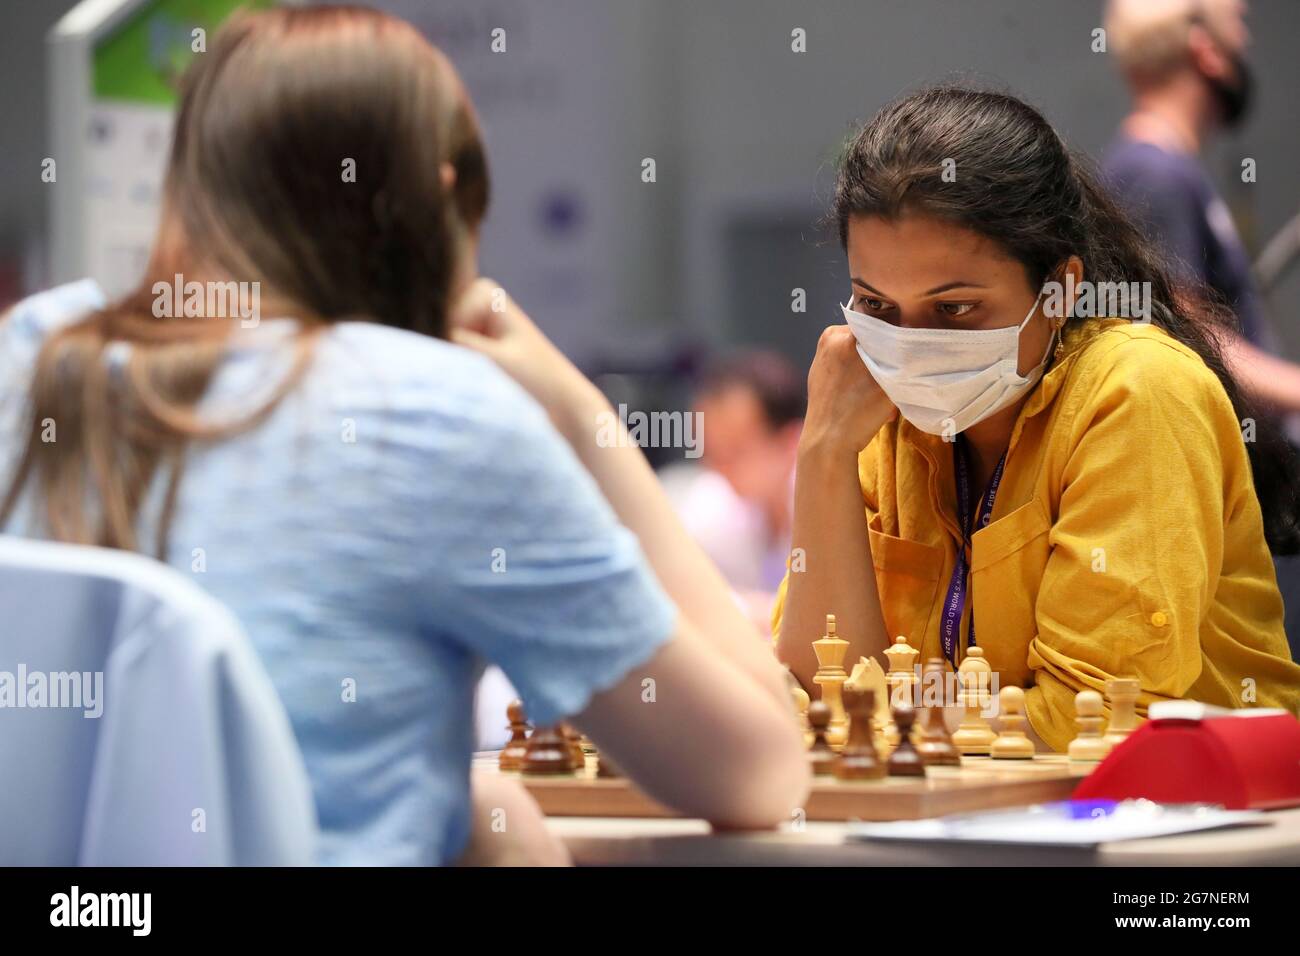 Chess world cup 2021